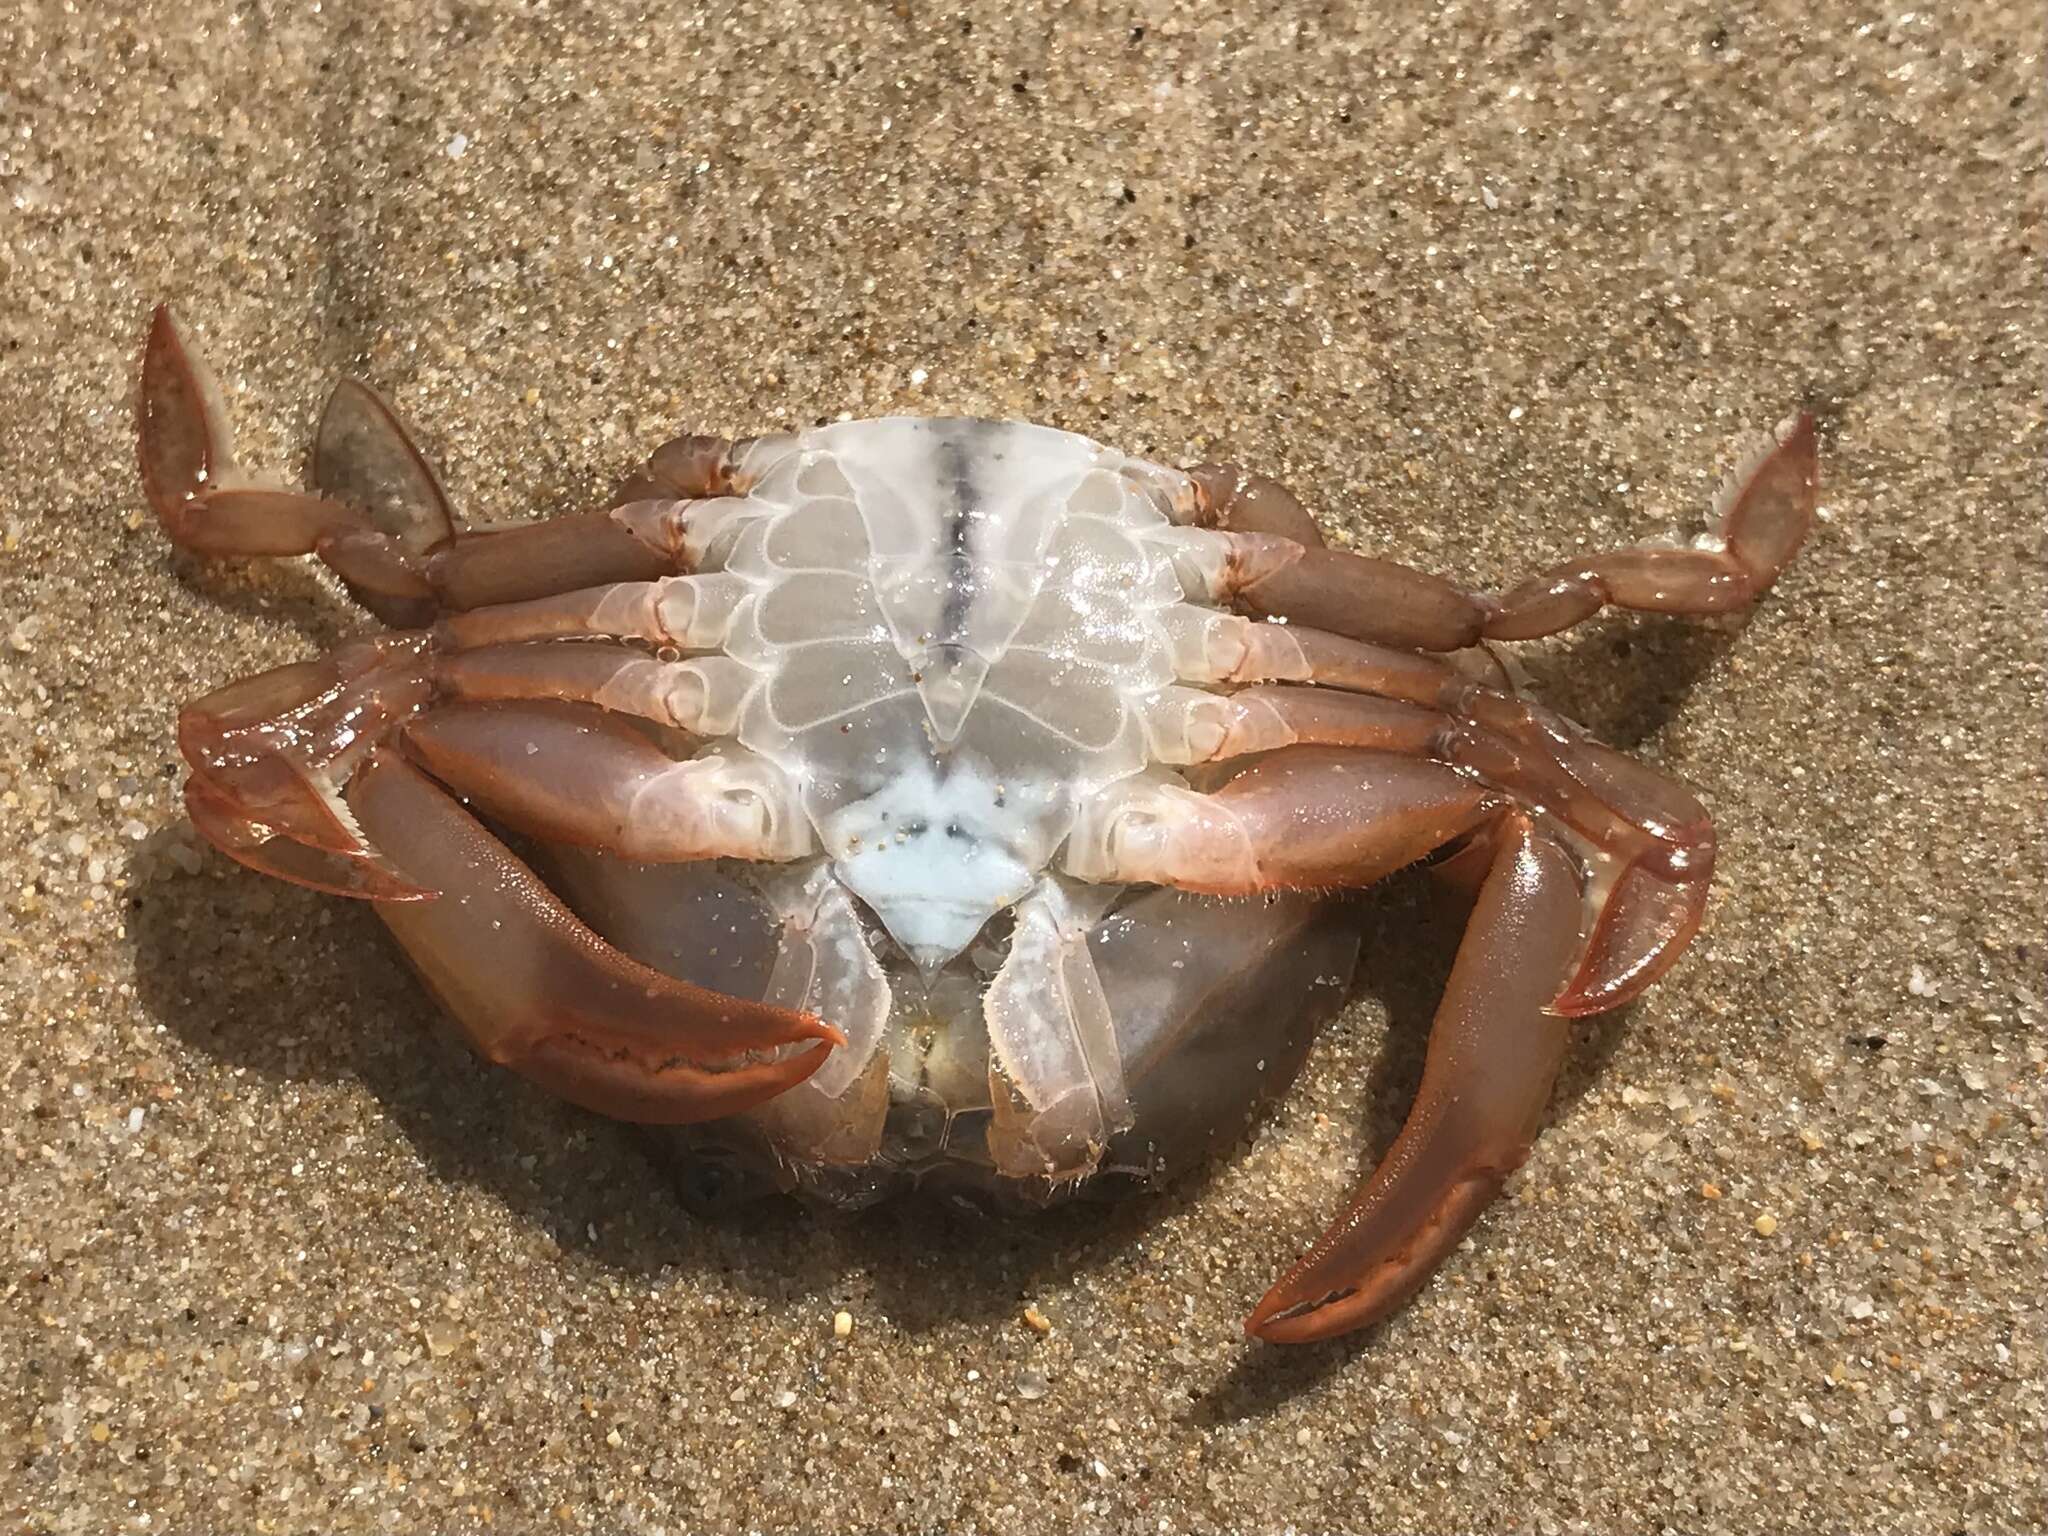 Image of Henslow's swimming crab